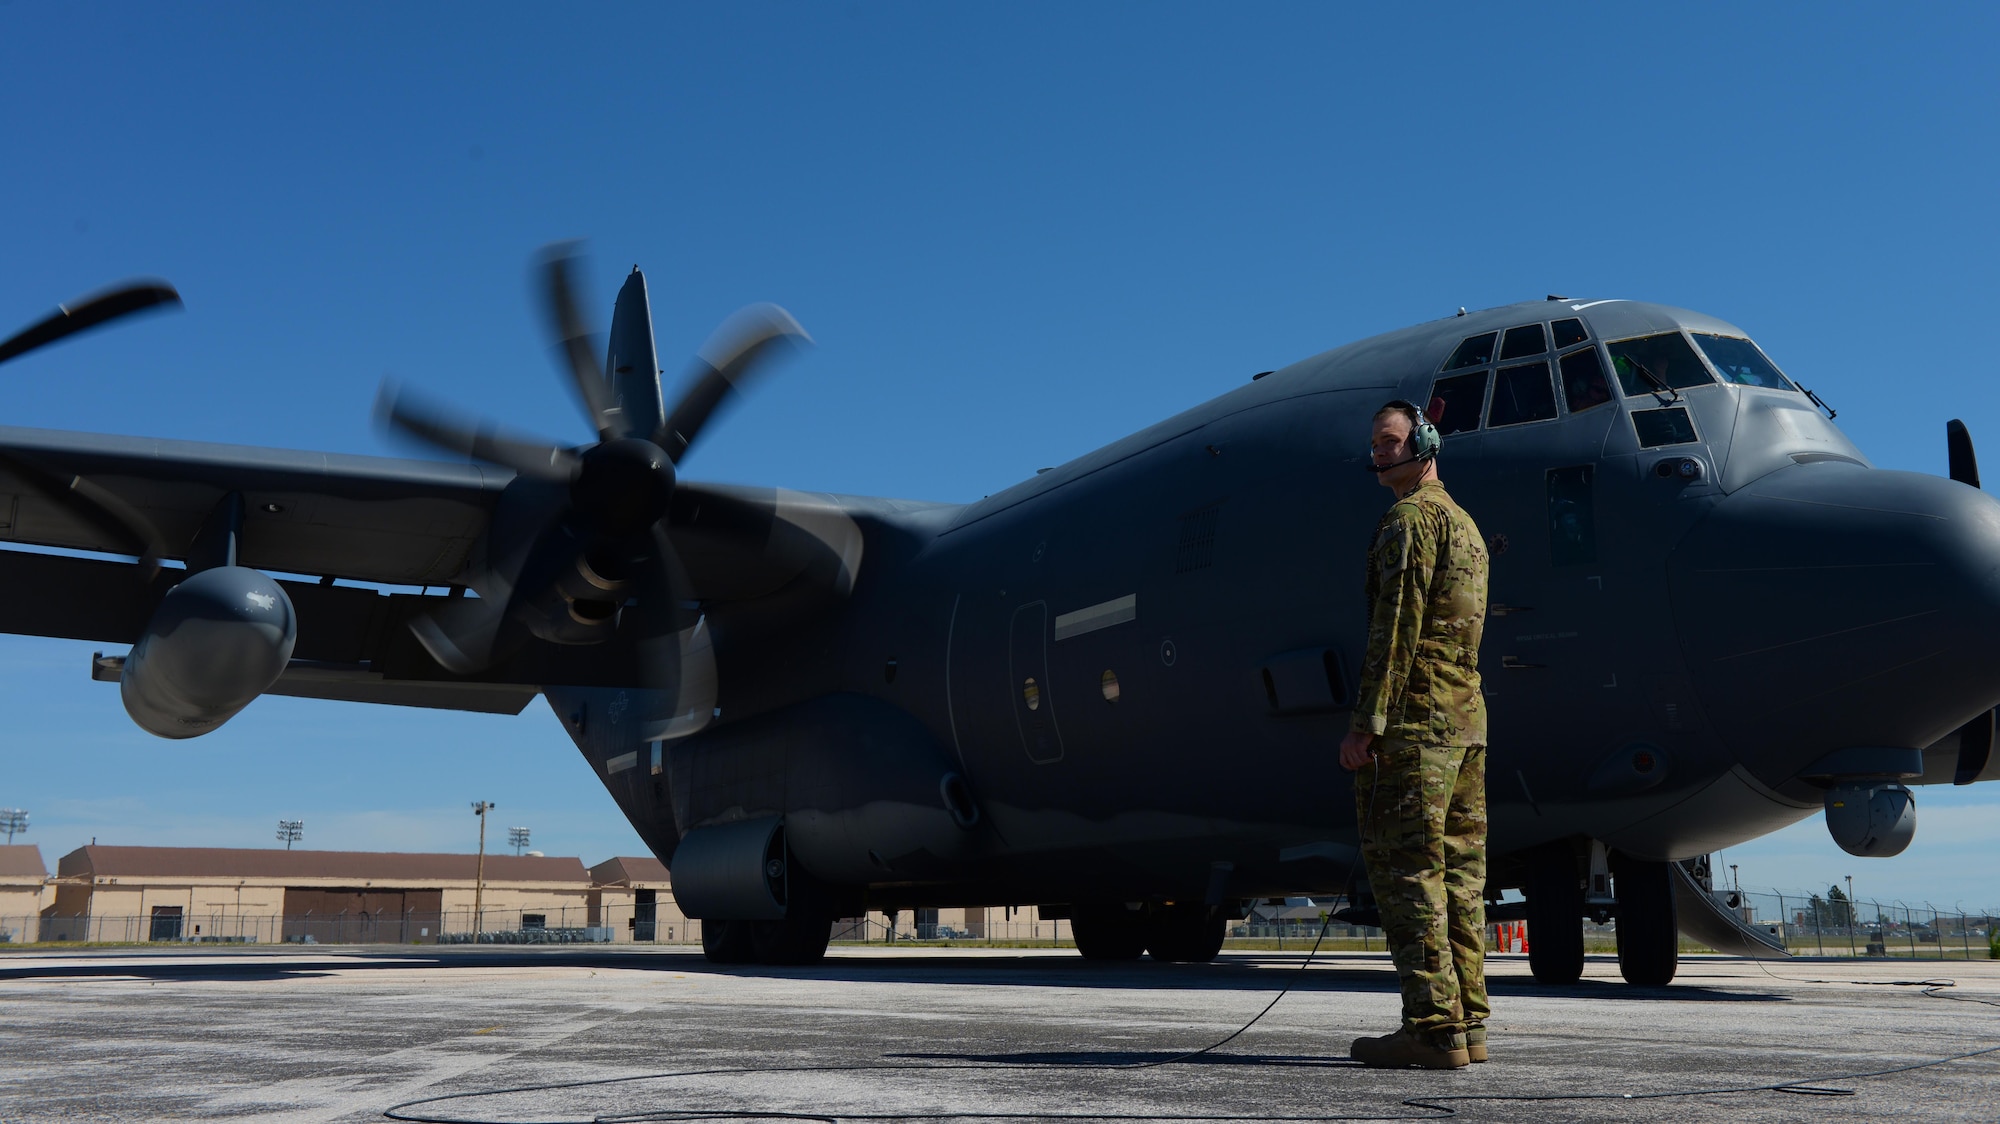 Staff Sgt. Philip Palmer, a C-130 Super Hercules loadmaster assigned to the 71st Rescue Squadron, Moody Air Force Base, Ga., watches a C-130 prime for flight during exercise Combat Raider at Ellsworth AFB, S.D., June 28, 2017. The C-130 is a versatile aircraft capable of performing combat search and rescue missions and refueling other aircraft. (U.S. Air Force photo by Airman Nicolas Z. Erwin)